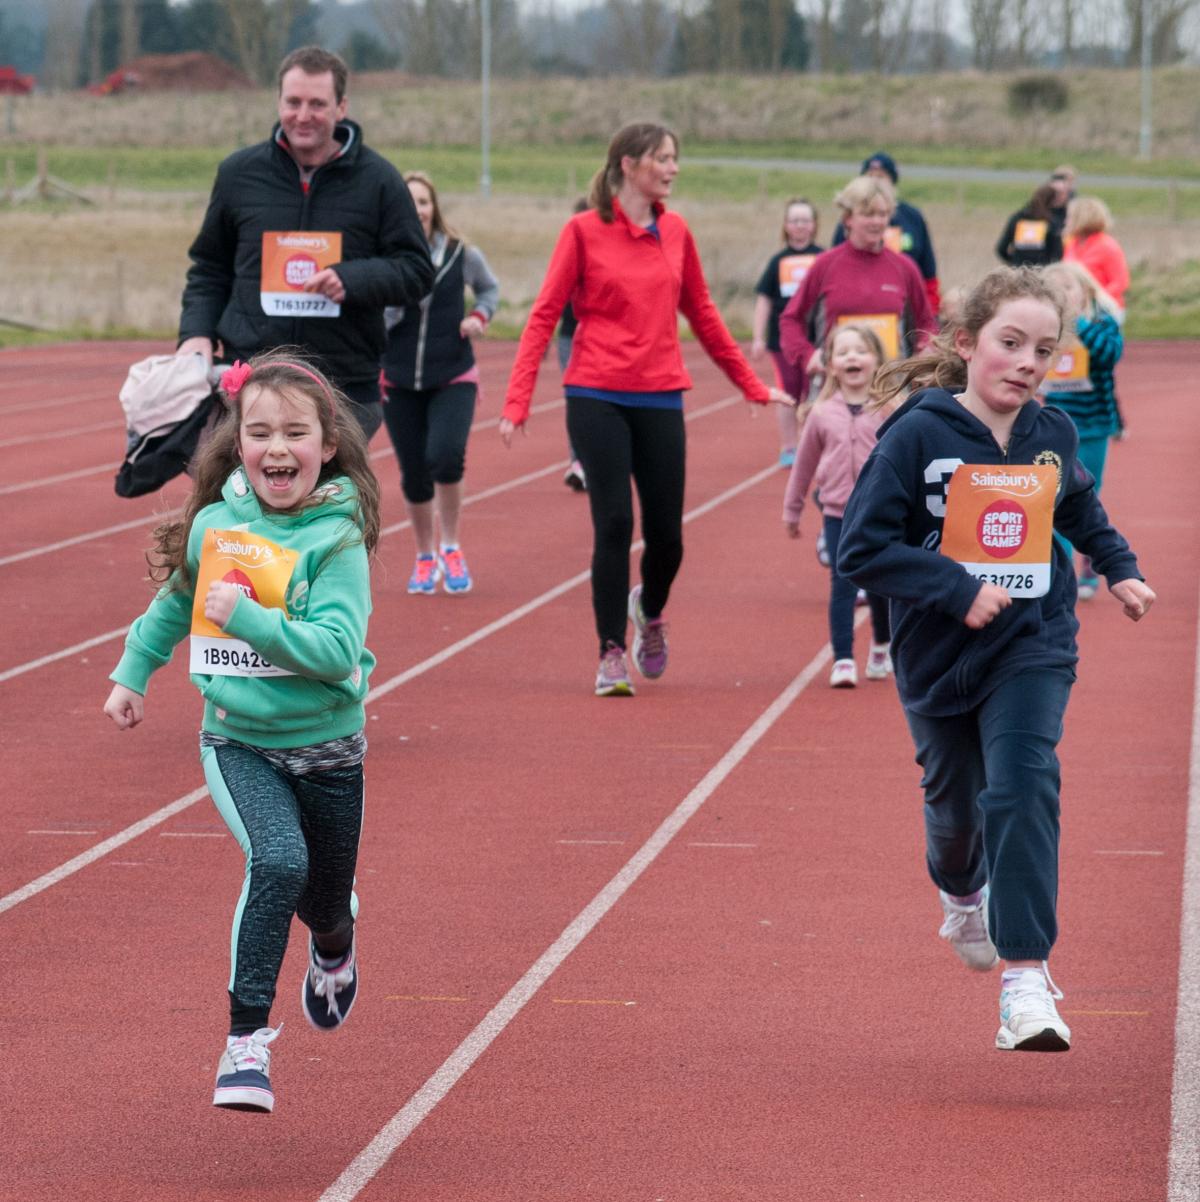 Residents take part in the Sainsbury's Sport Relief Stourport Mile